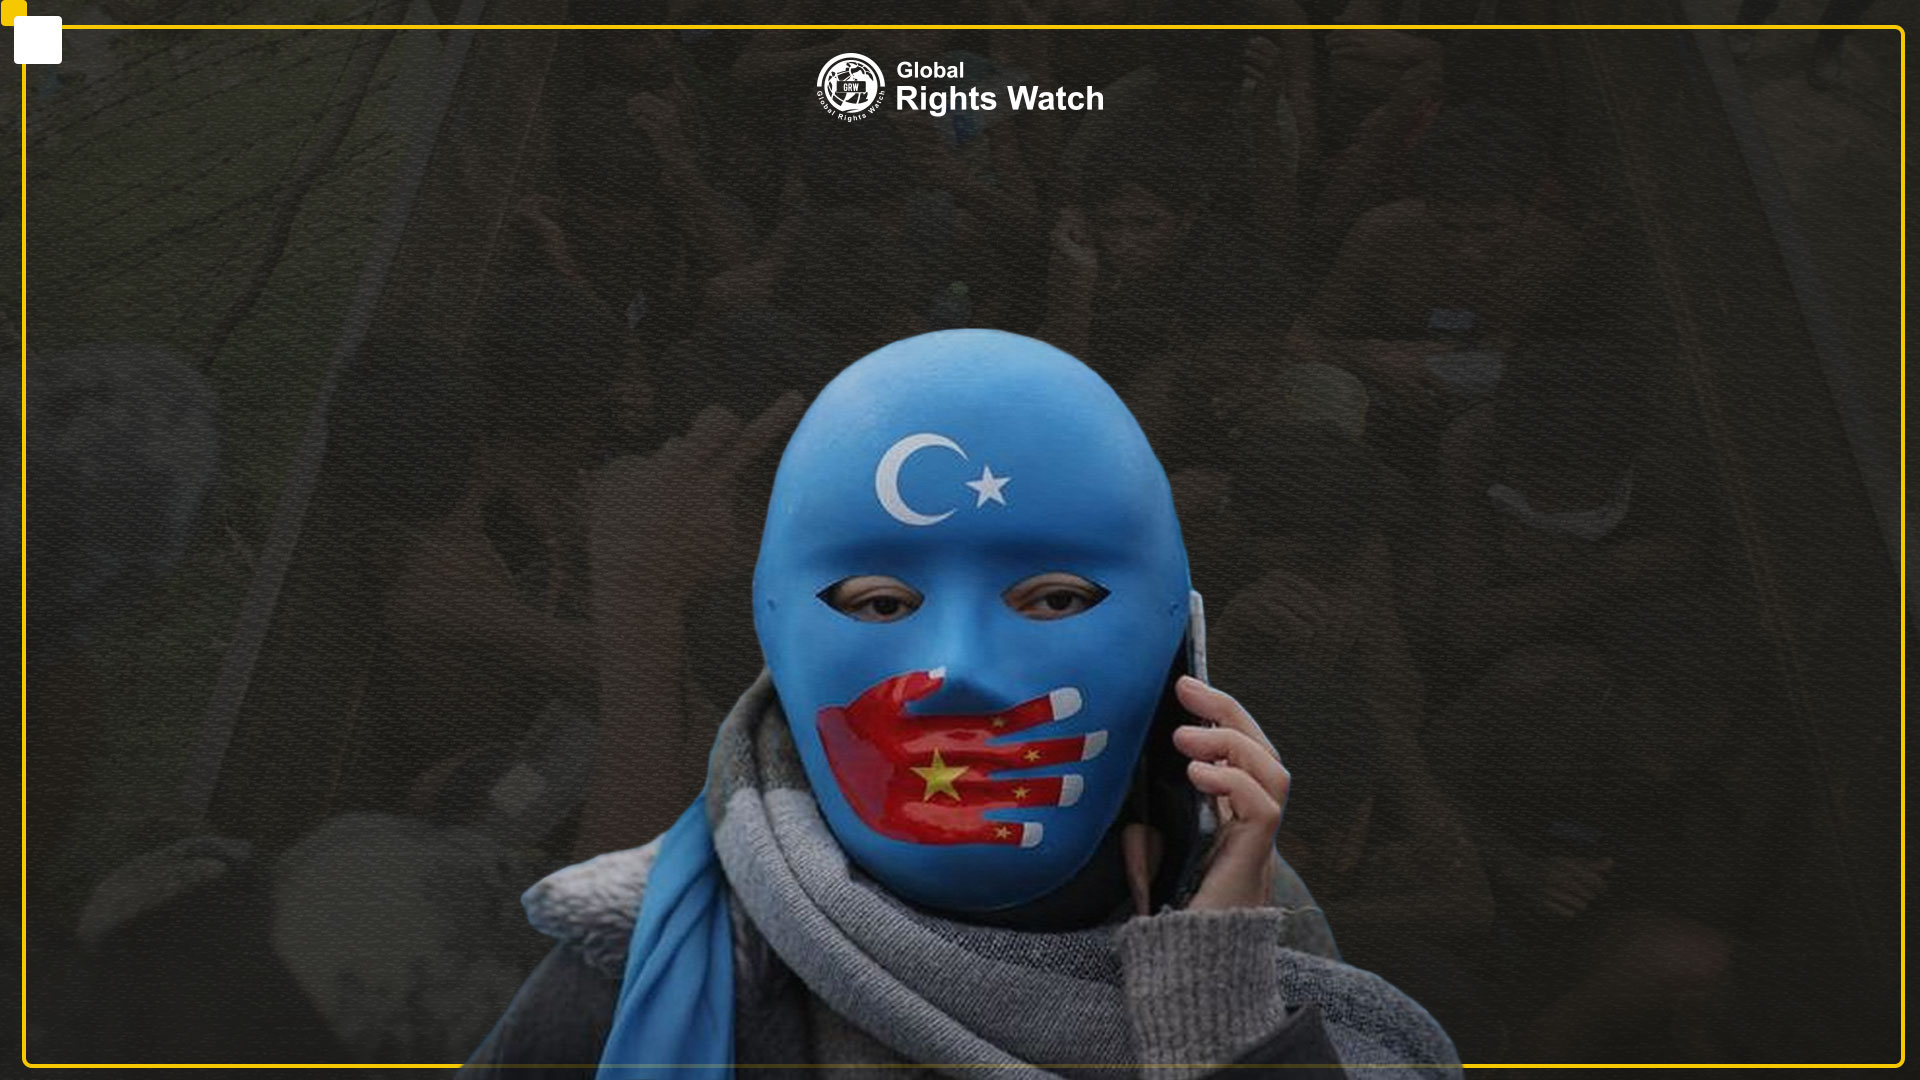 China's Repression of Uyghurs in Xinjiang Continued